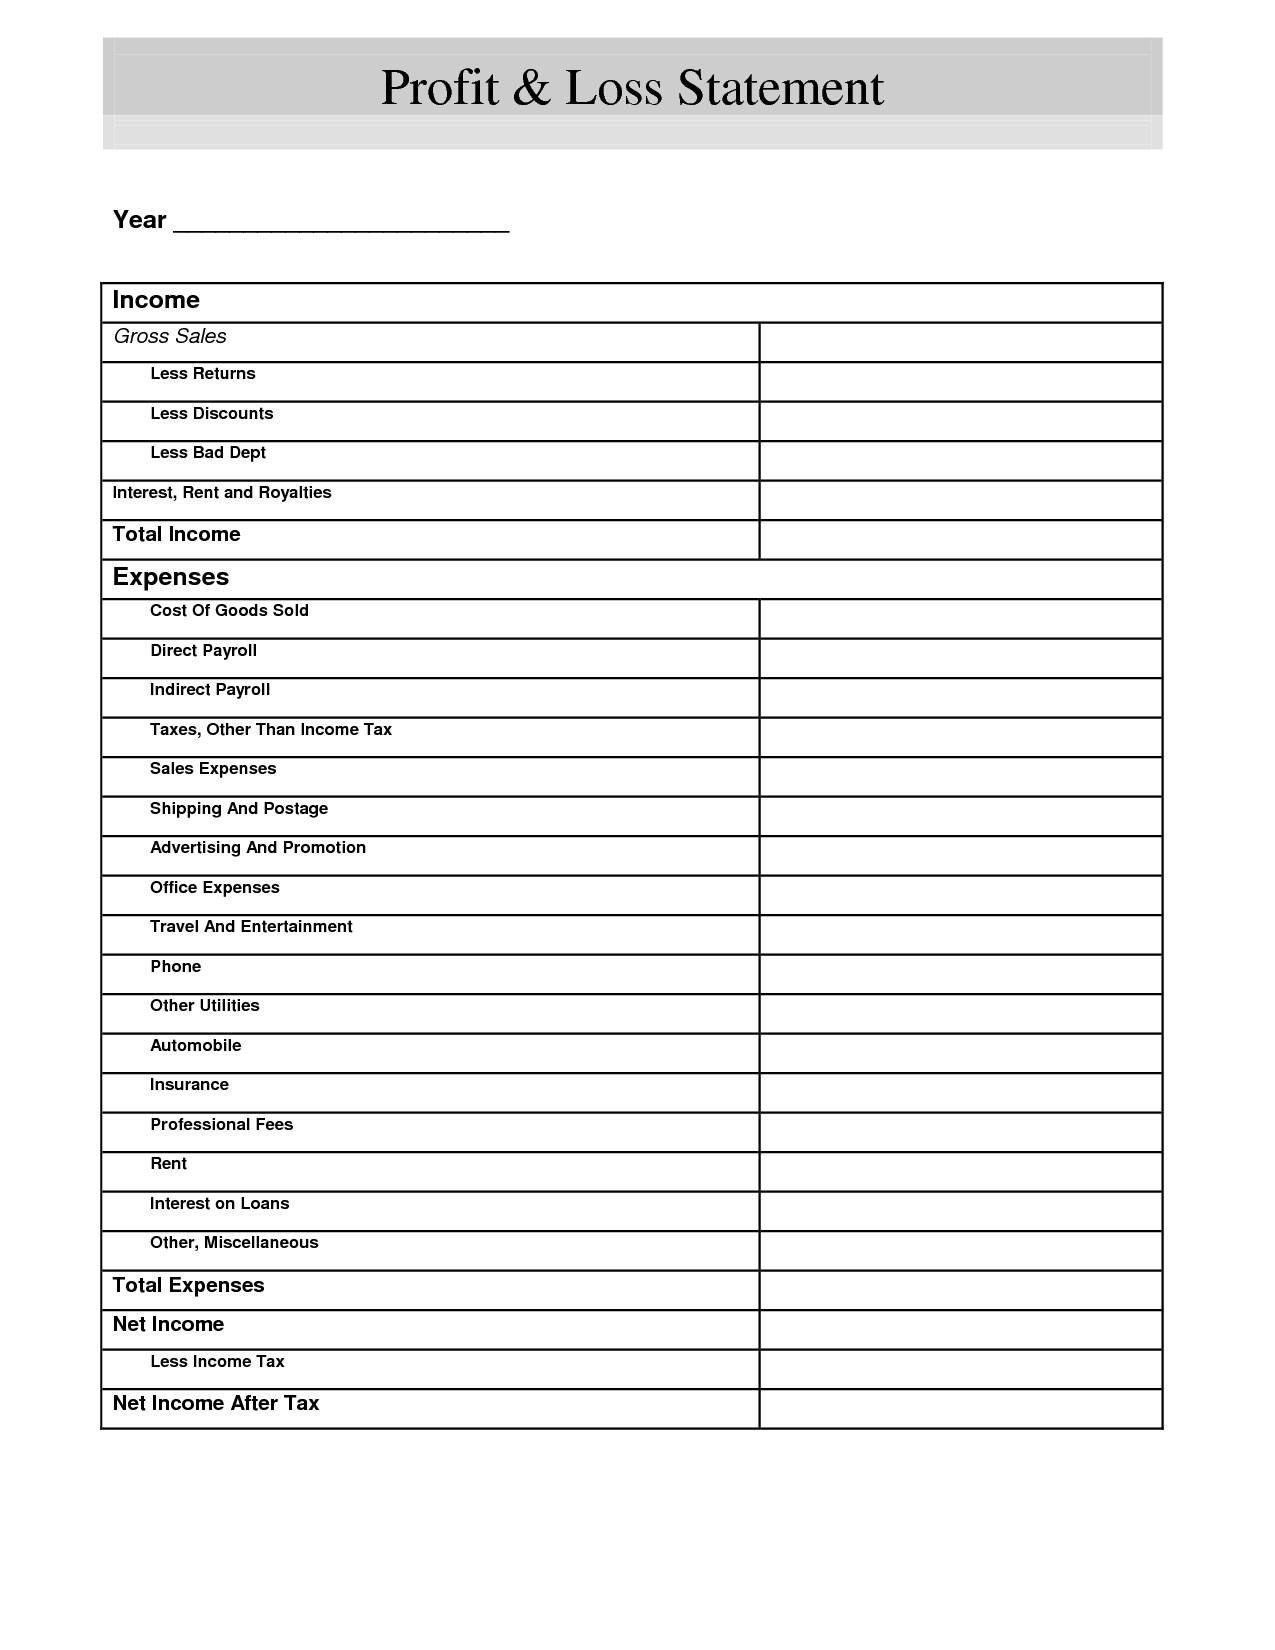 Letter Of Profit And Loss Statement Template For Self Employed Excel With Profit And Loss Statement Template For Self Employed Excel For Google Spreadsheet